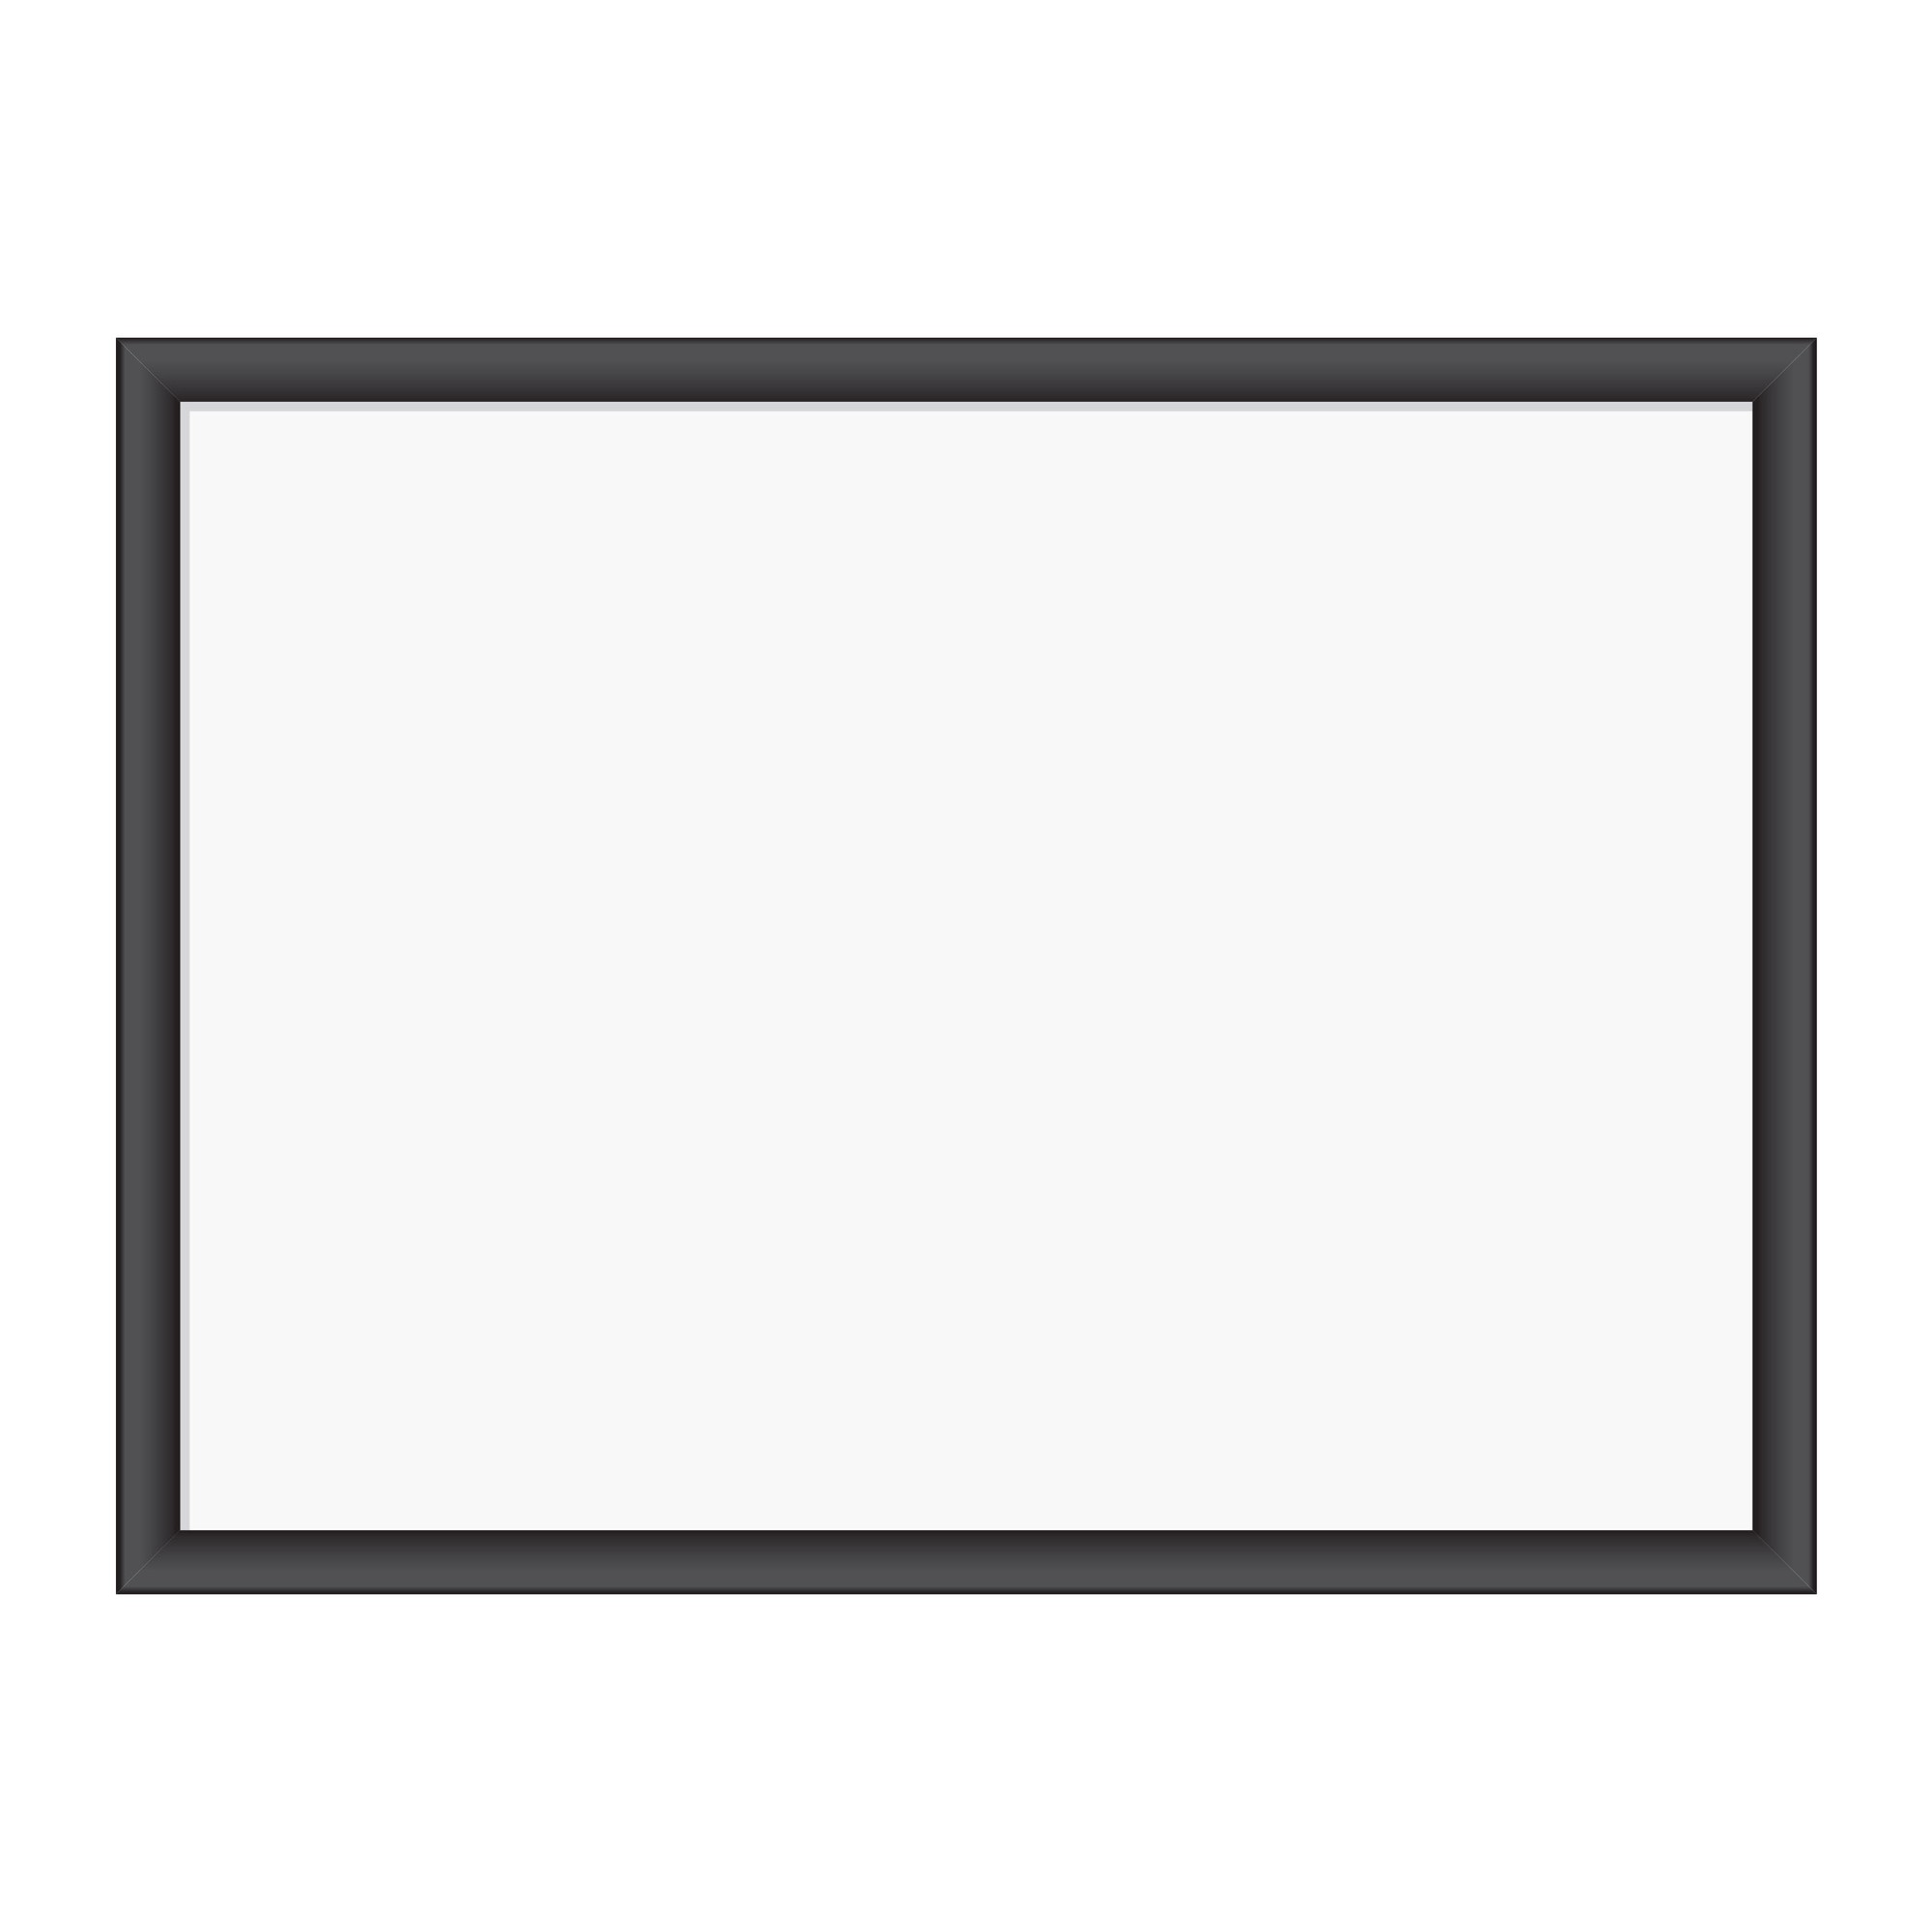 Magnetic Dry Erase Board with MDF Frame, 24 x 18, White Surface, Black Frame